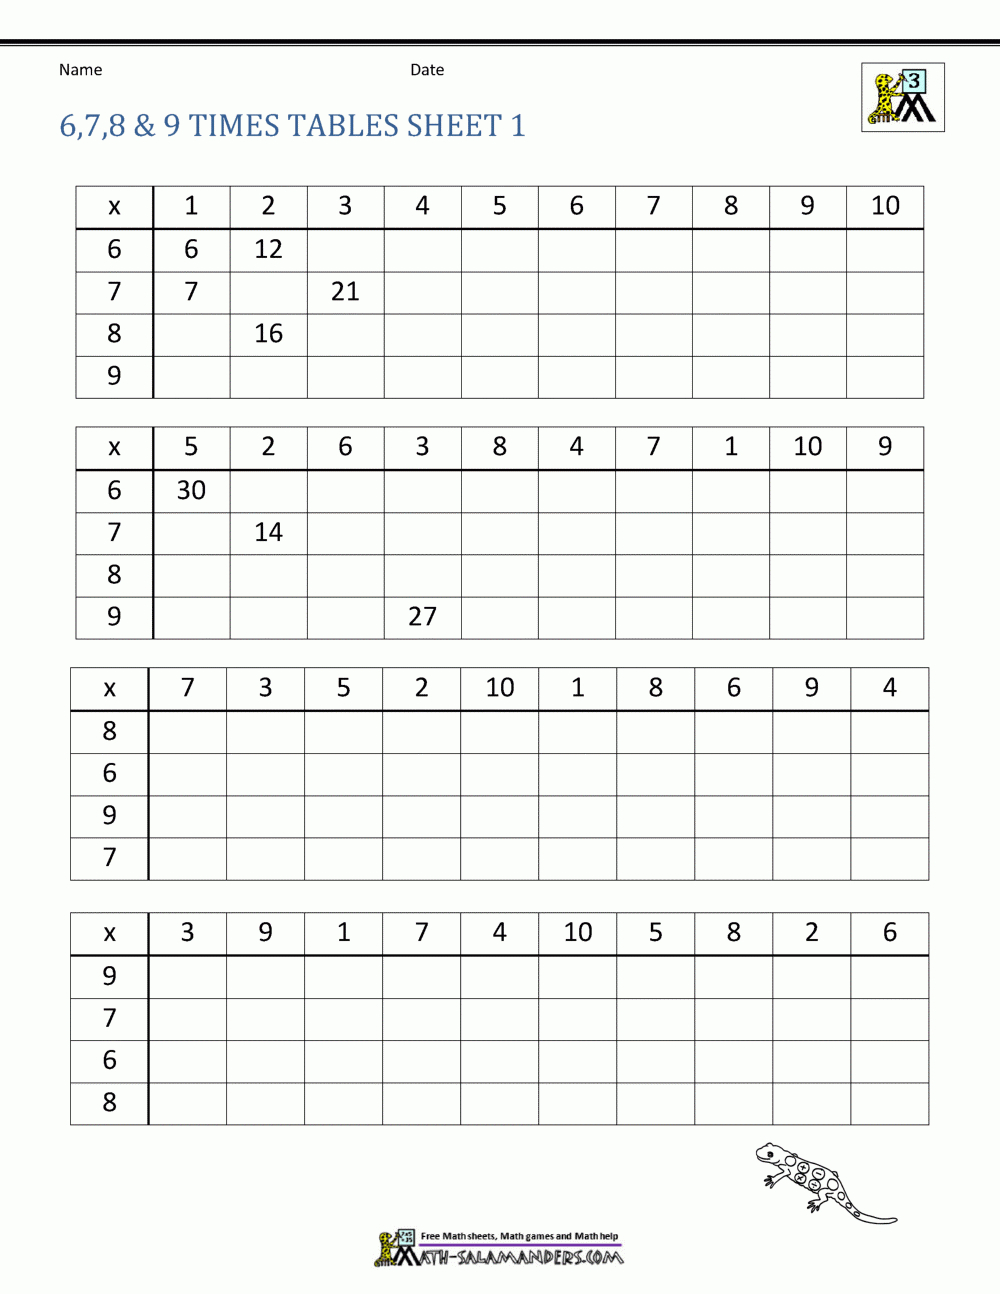 Multiplication Drill Sheets 3Rd Grade pertaining to Free Printable Multiplication Problems